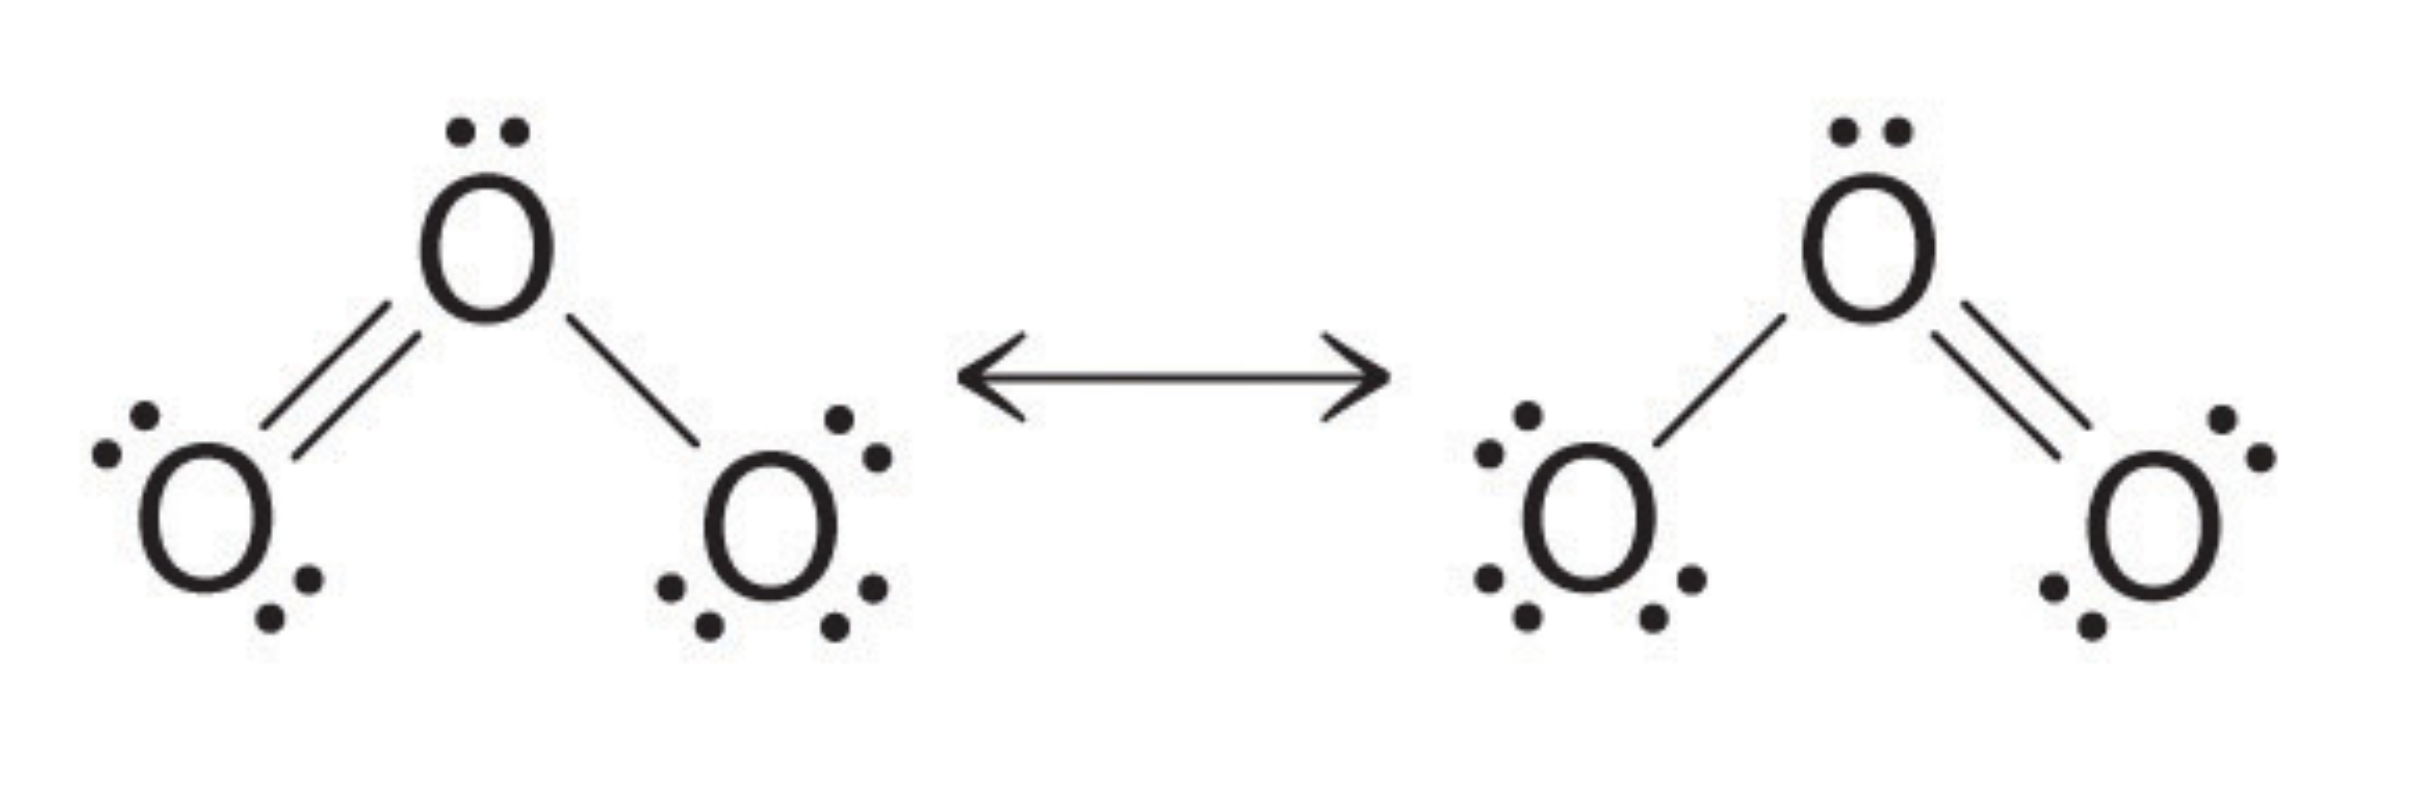 The two resonance structures of ozone